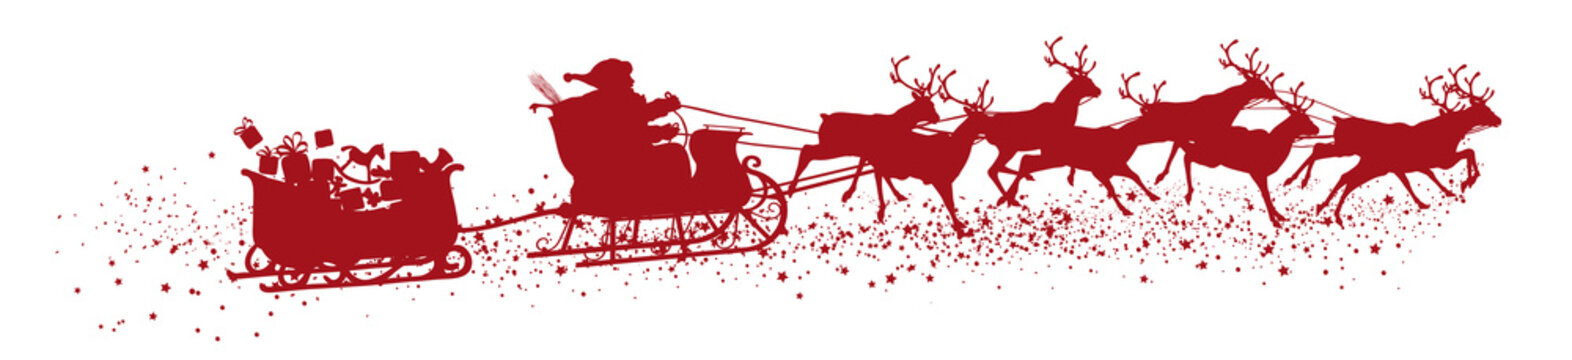 Santa Claus with Reindeer Sleigh and Trailer - Red Vector Silhouette